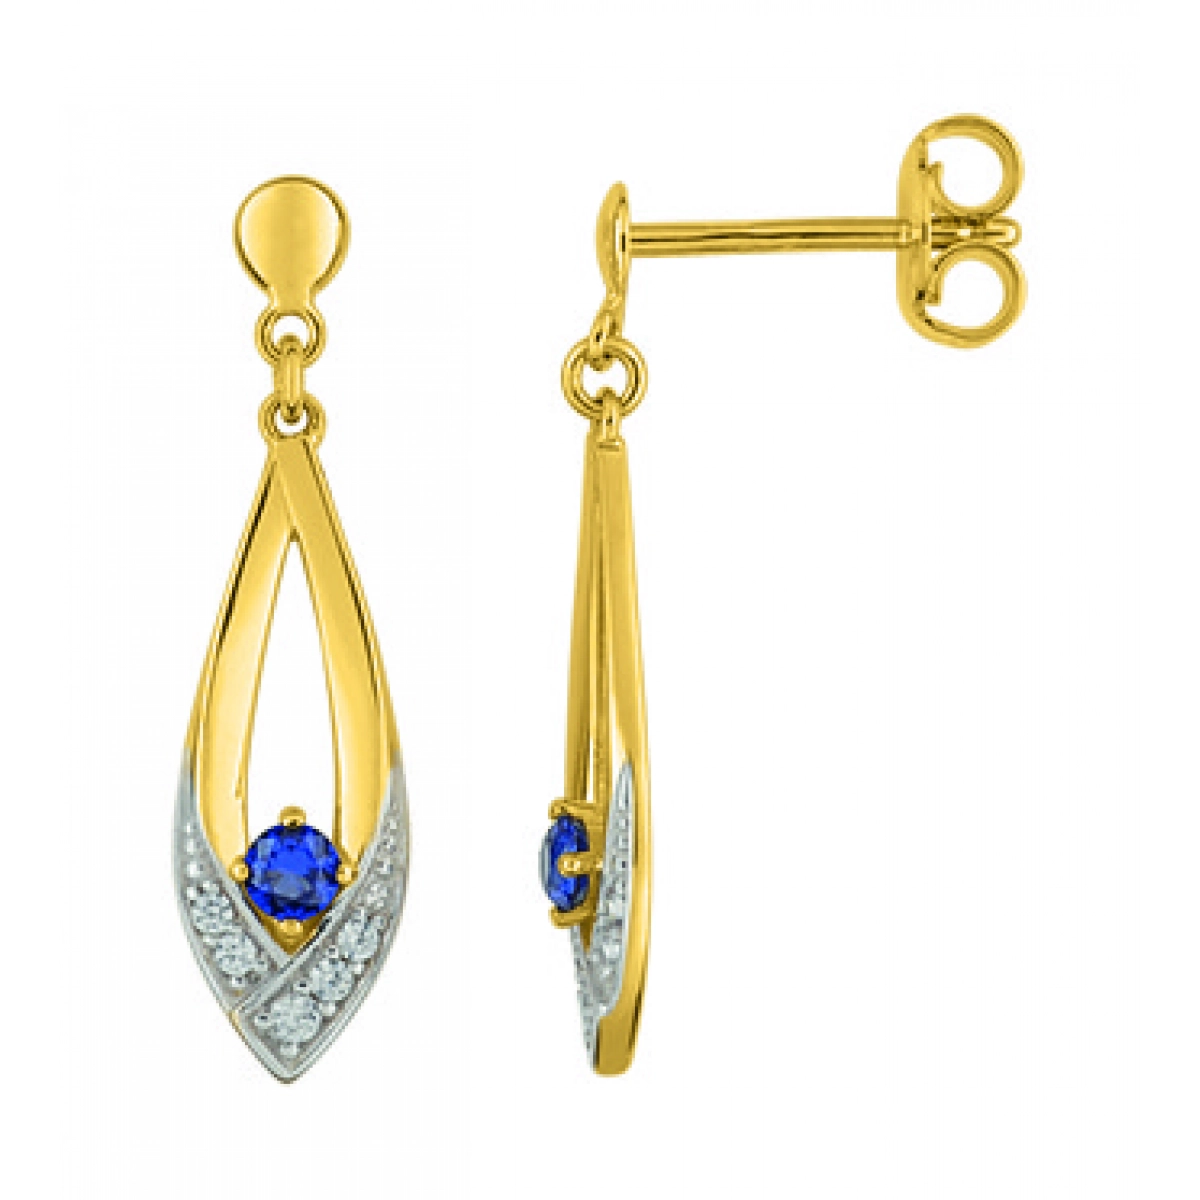 Earrings pair w. synth sapphire and rhod gold plated Brass  Lua Blanca  135630.2.0